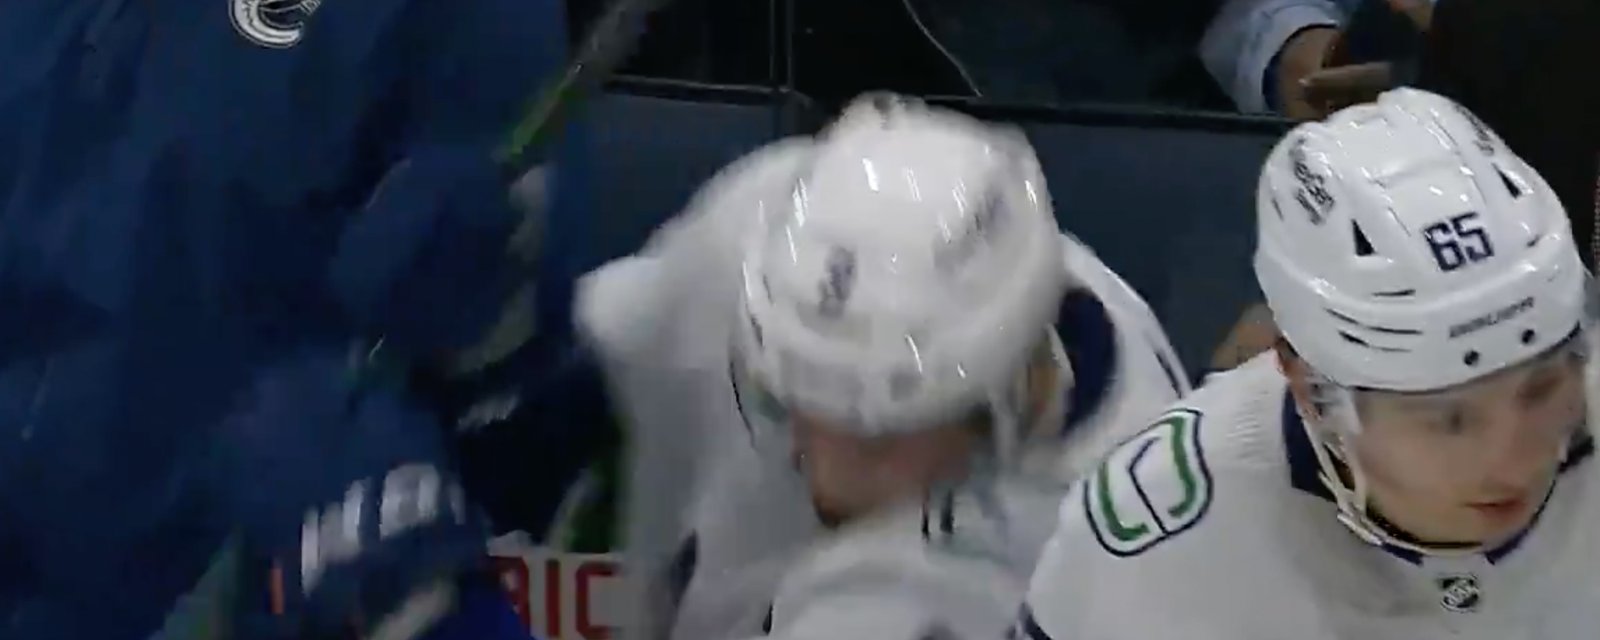 JT Miller flips out at the bench, slams his stick and screams at teammates